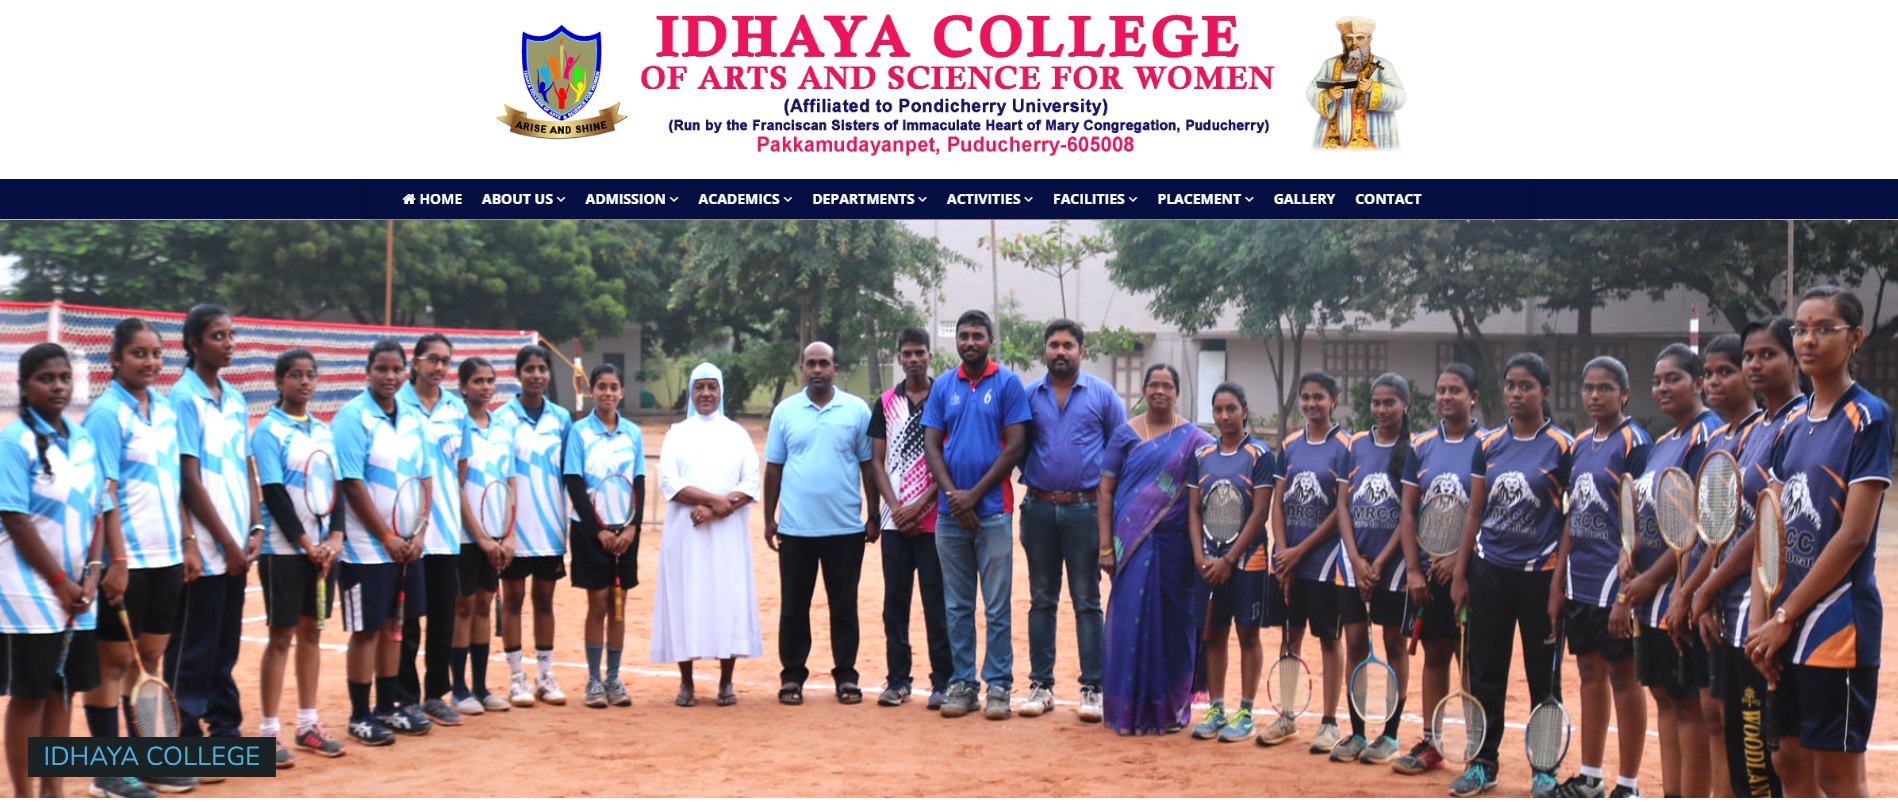 Idhaya College of Arts and Science for women